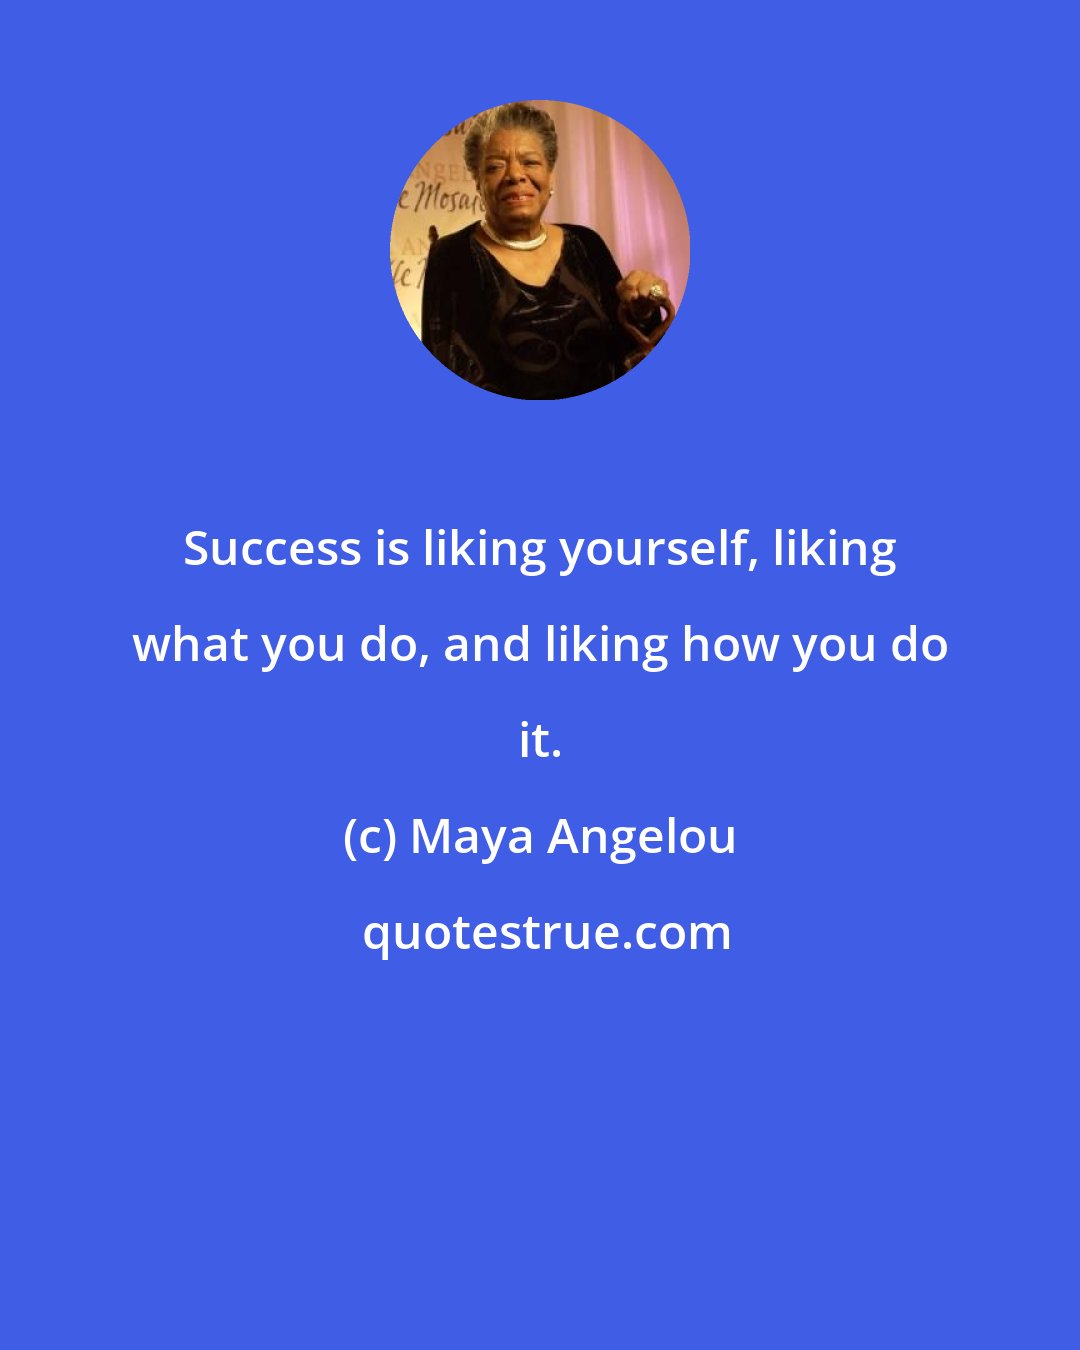 Maya Angelou: Success is liking yourself, liking what you do, and liking how you do it.